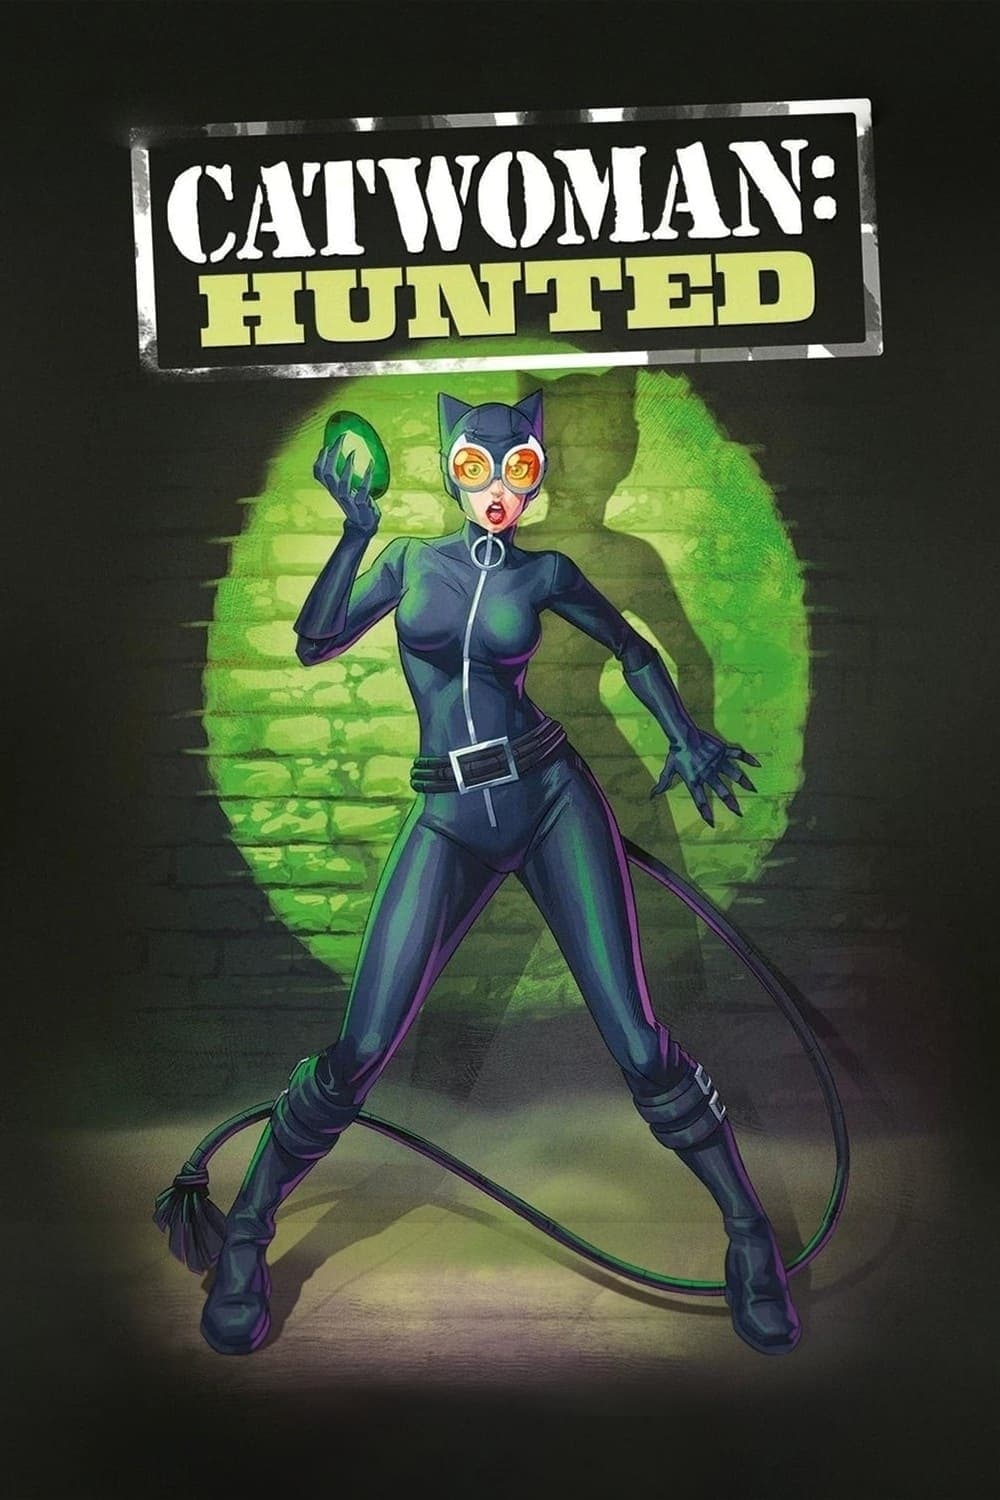 Catwoman: Hunted film